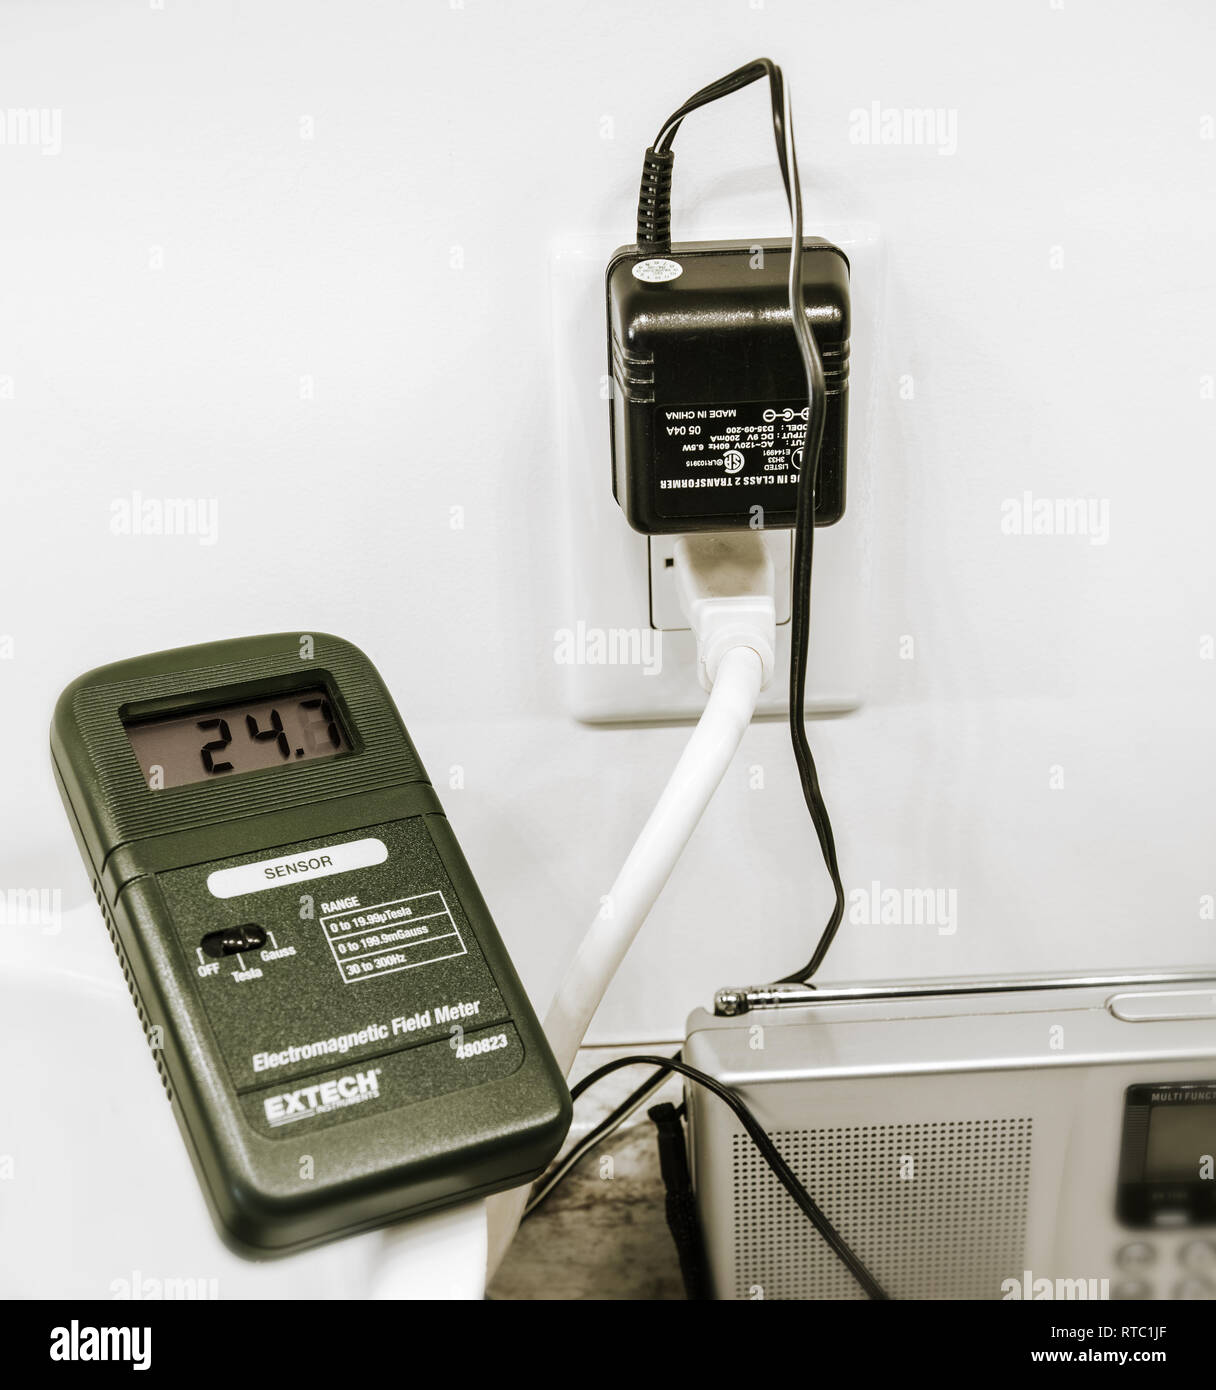 The electromagnetic field meter measures very large amounts of emissions from a small wall transformer (Gauss units). Approximately distance: 20 cm. Stock Photo